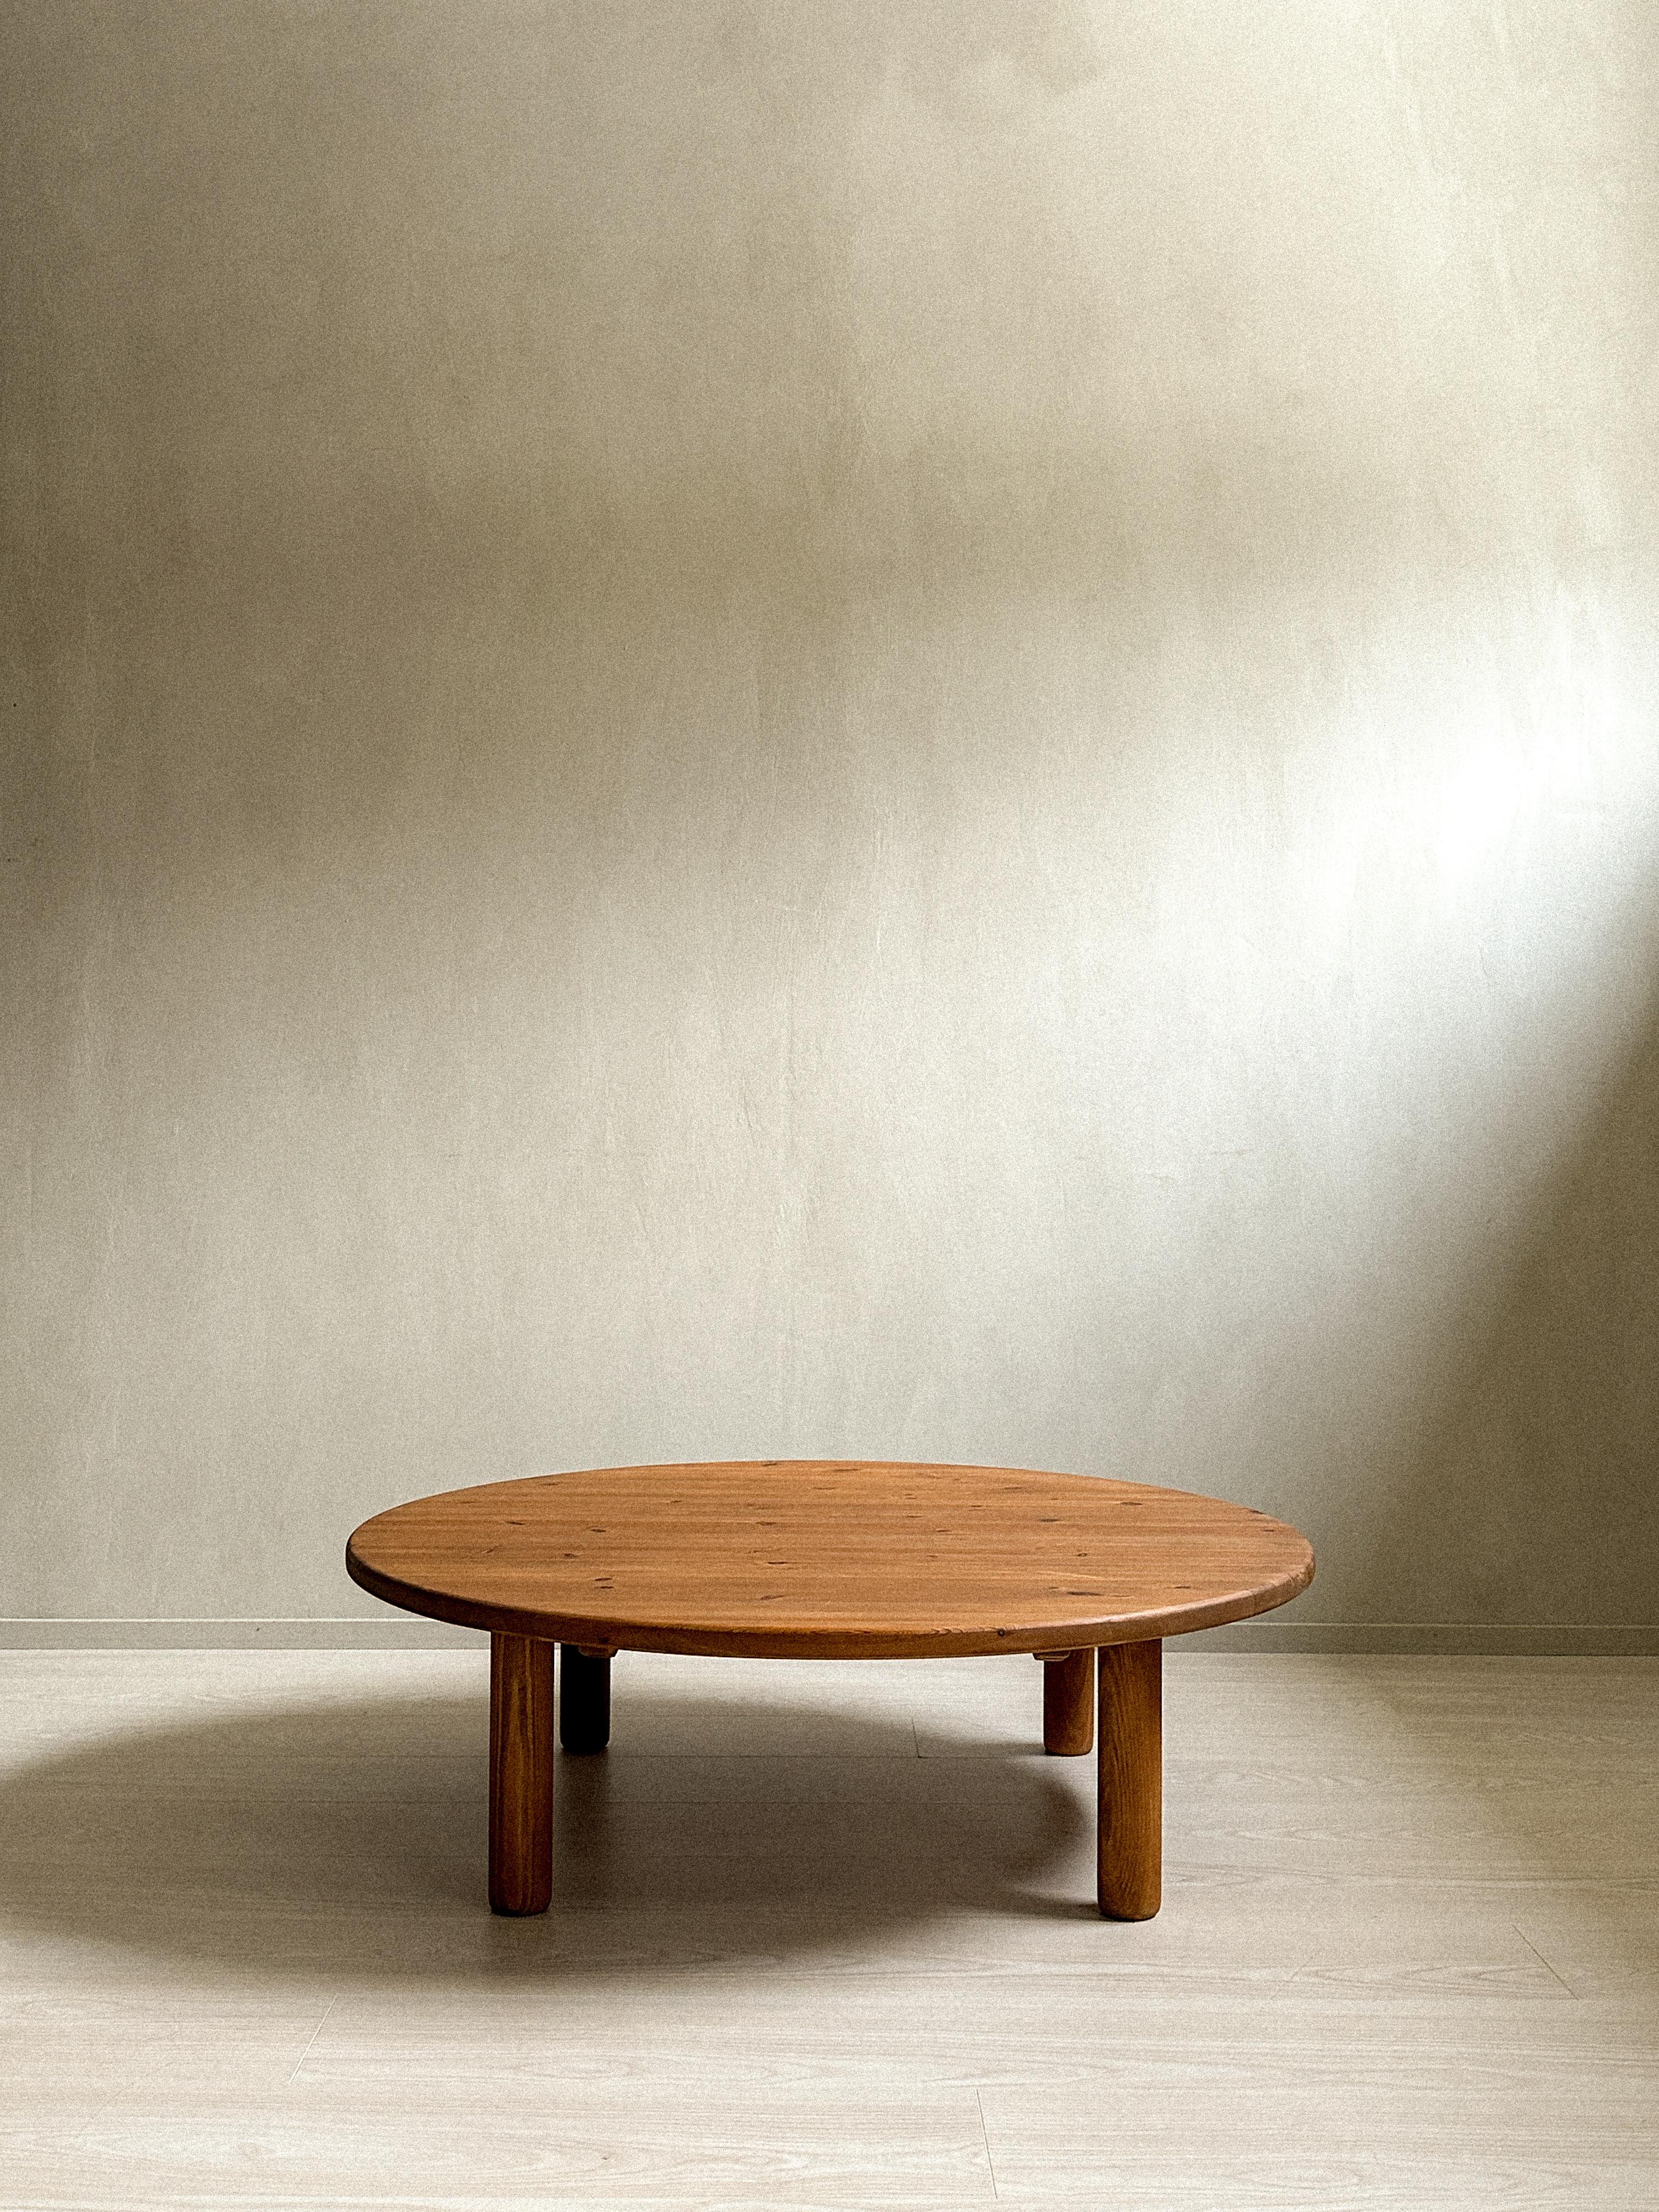 This Scandinavian midcentury coffee table from around 1960s, inspired by Charlotte Perriand, features a brown stained color and is crafted from solid pine. Its four rounded legs add a unique touch of elegance to the design.